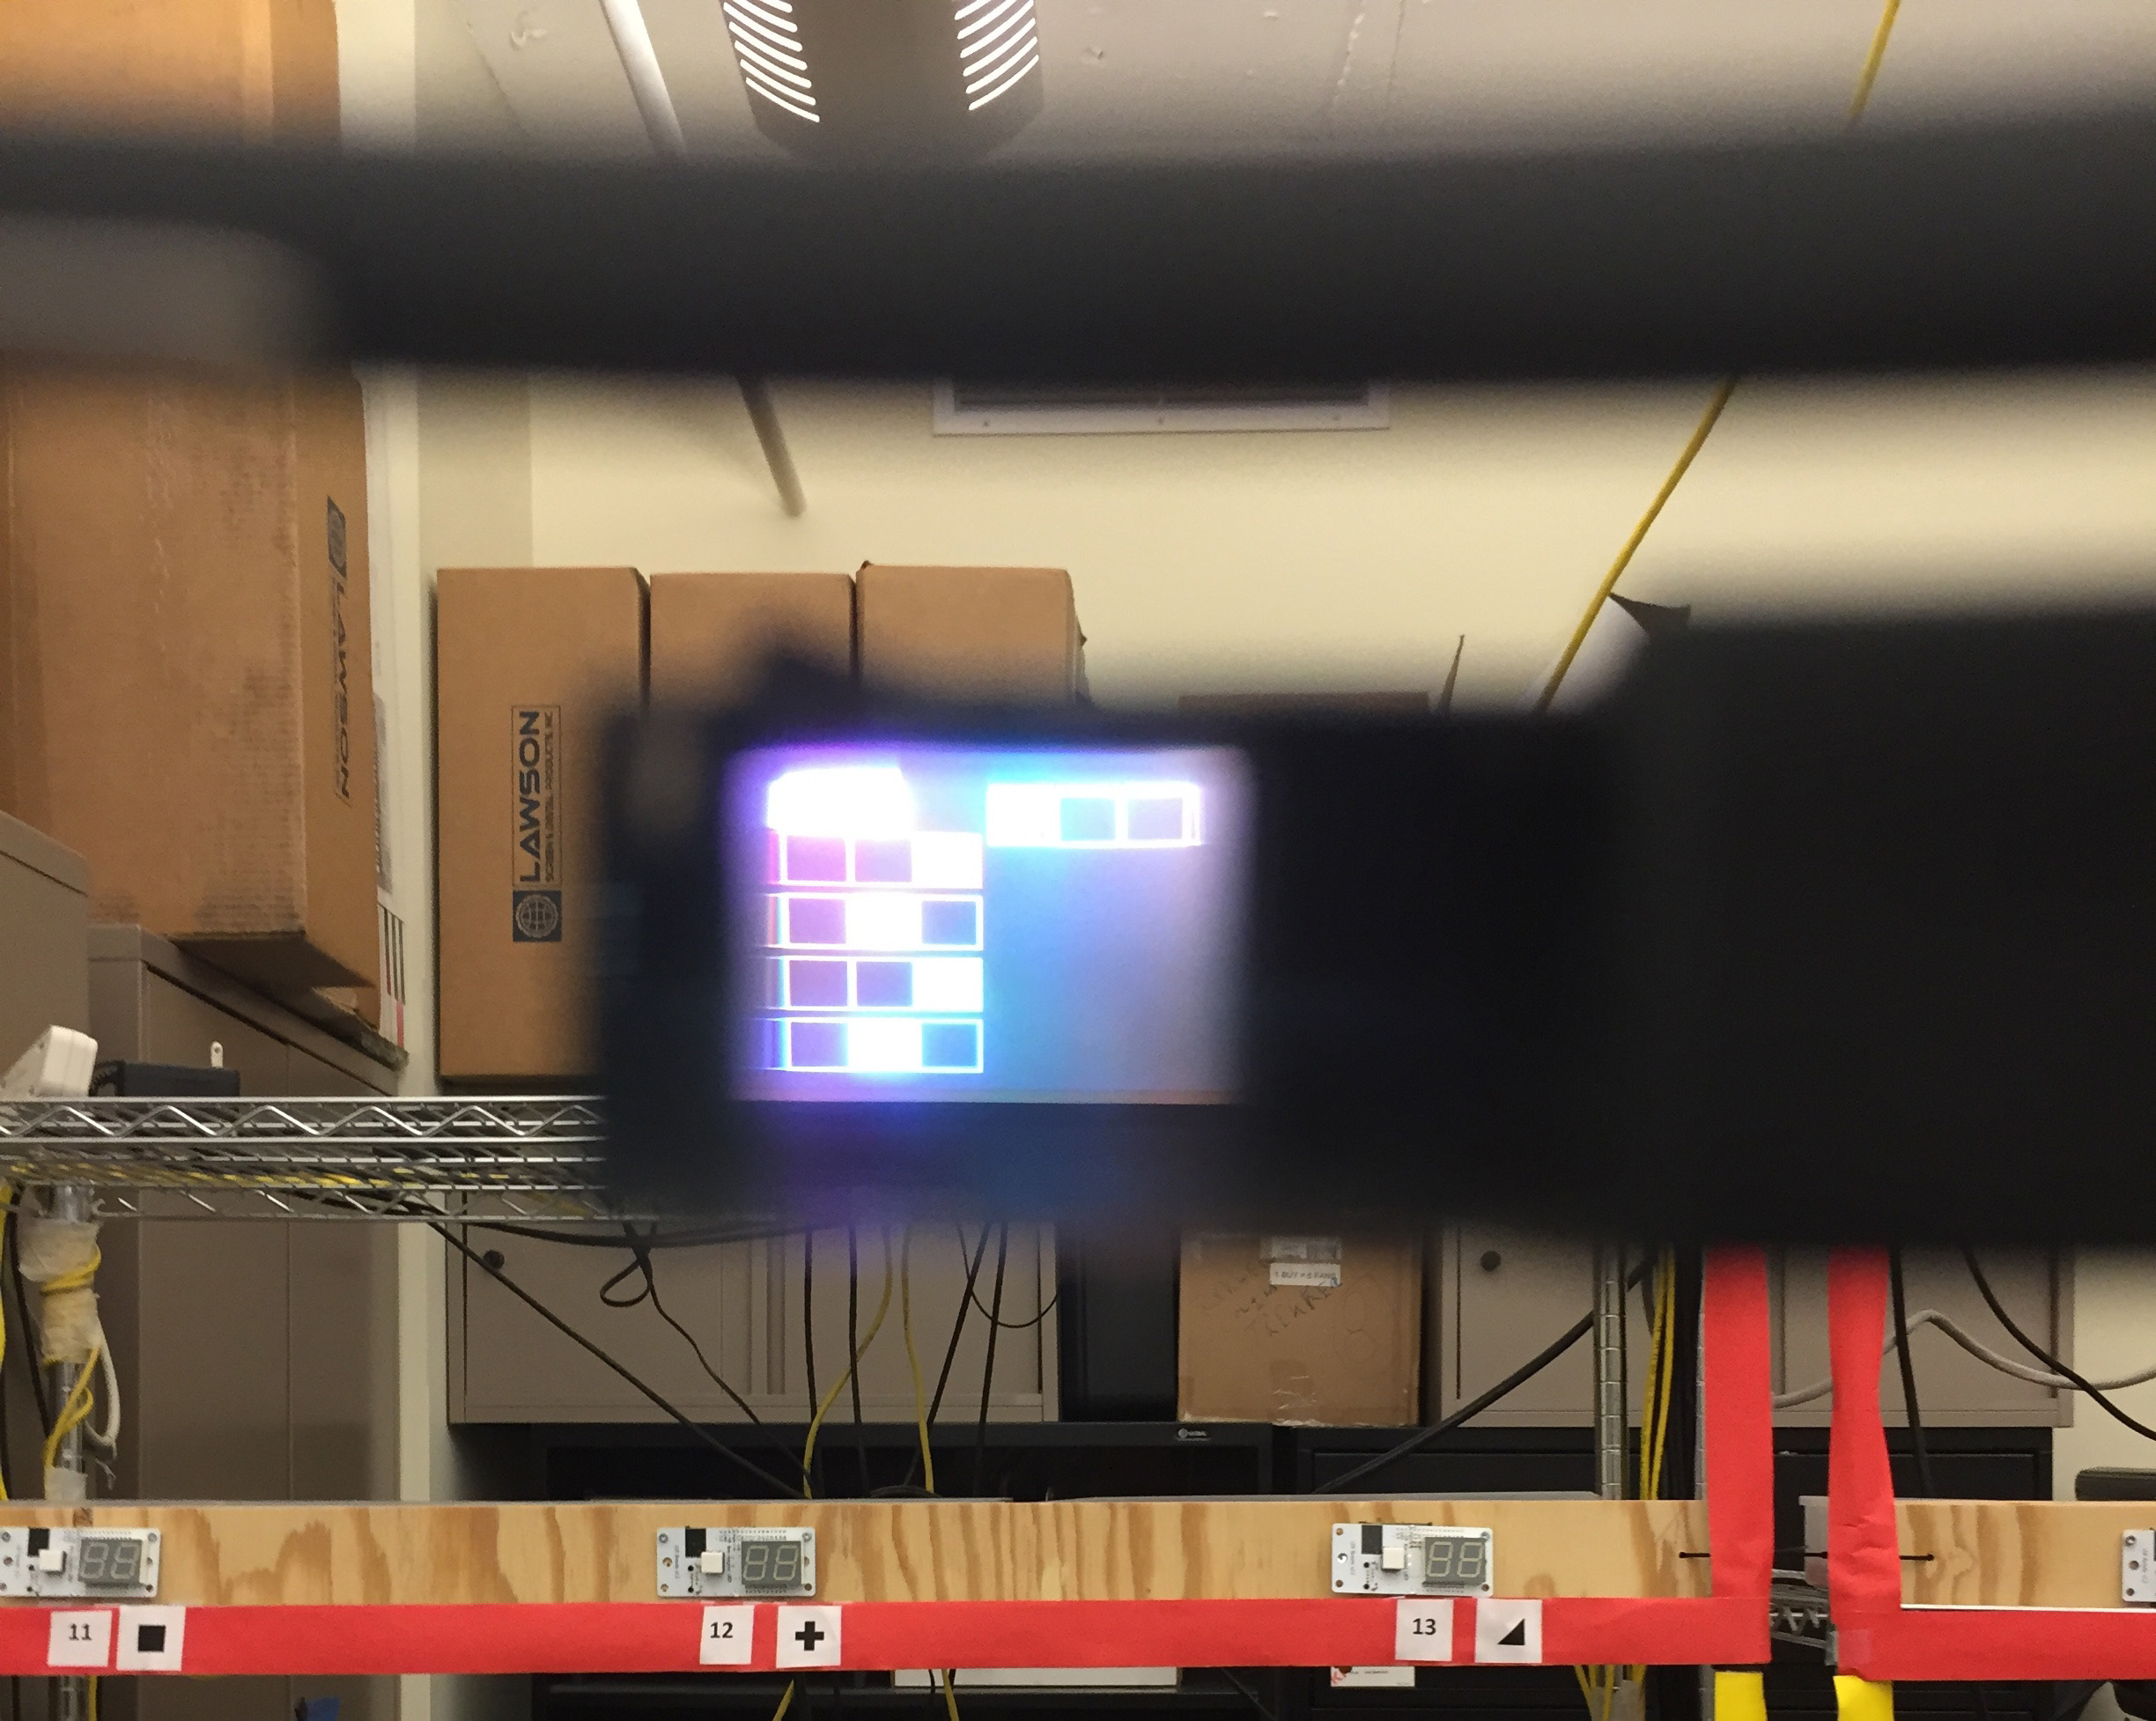 Pick-by-head-up display system using a Google Glass with a opaque display to show the pick order instructions.